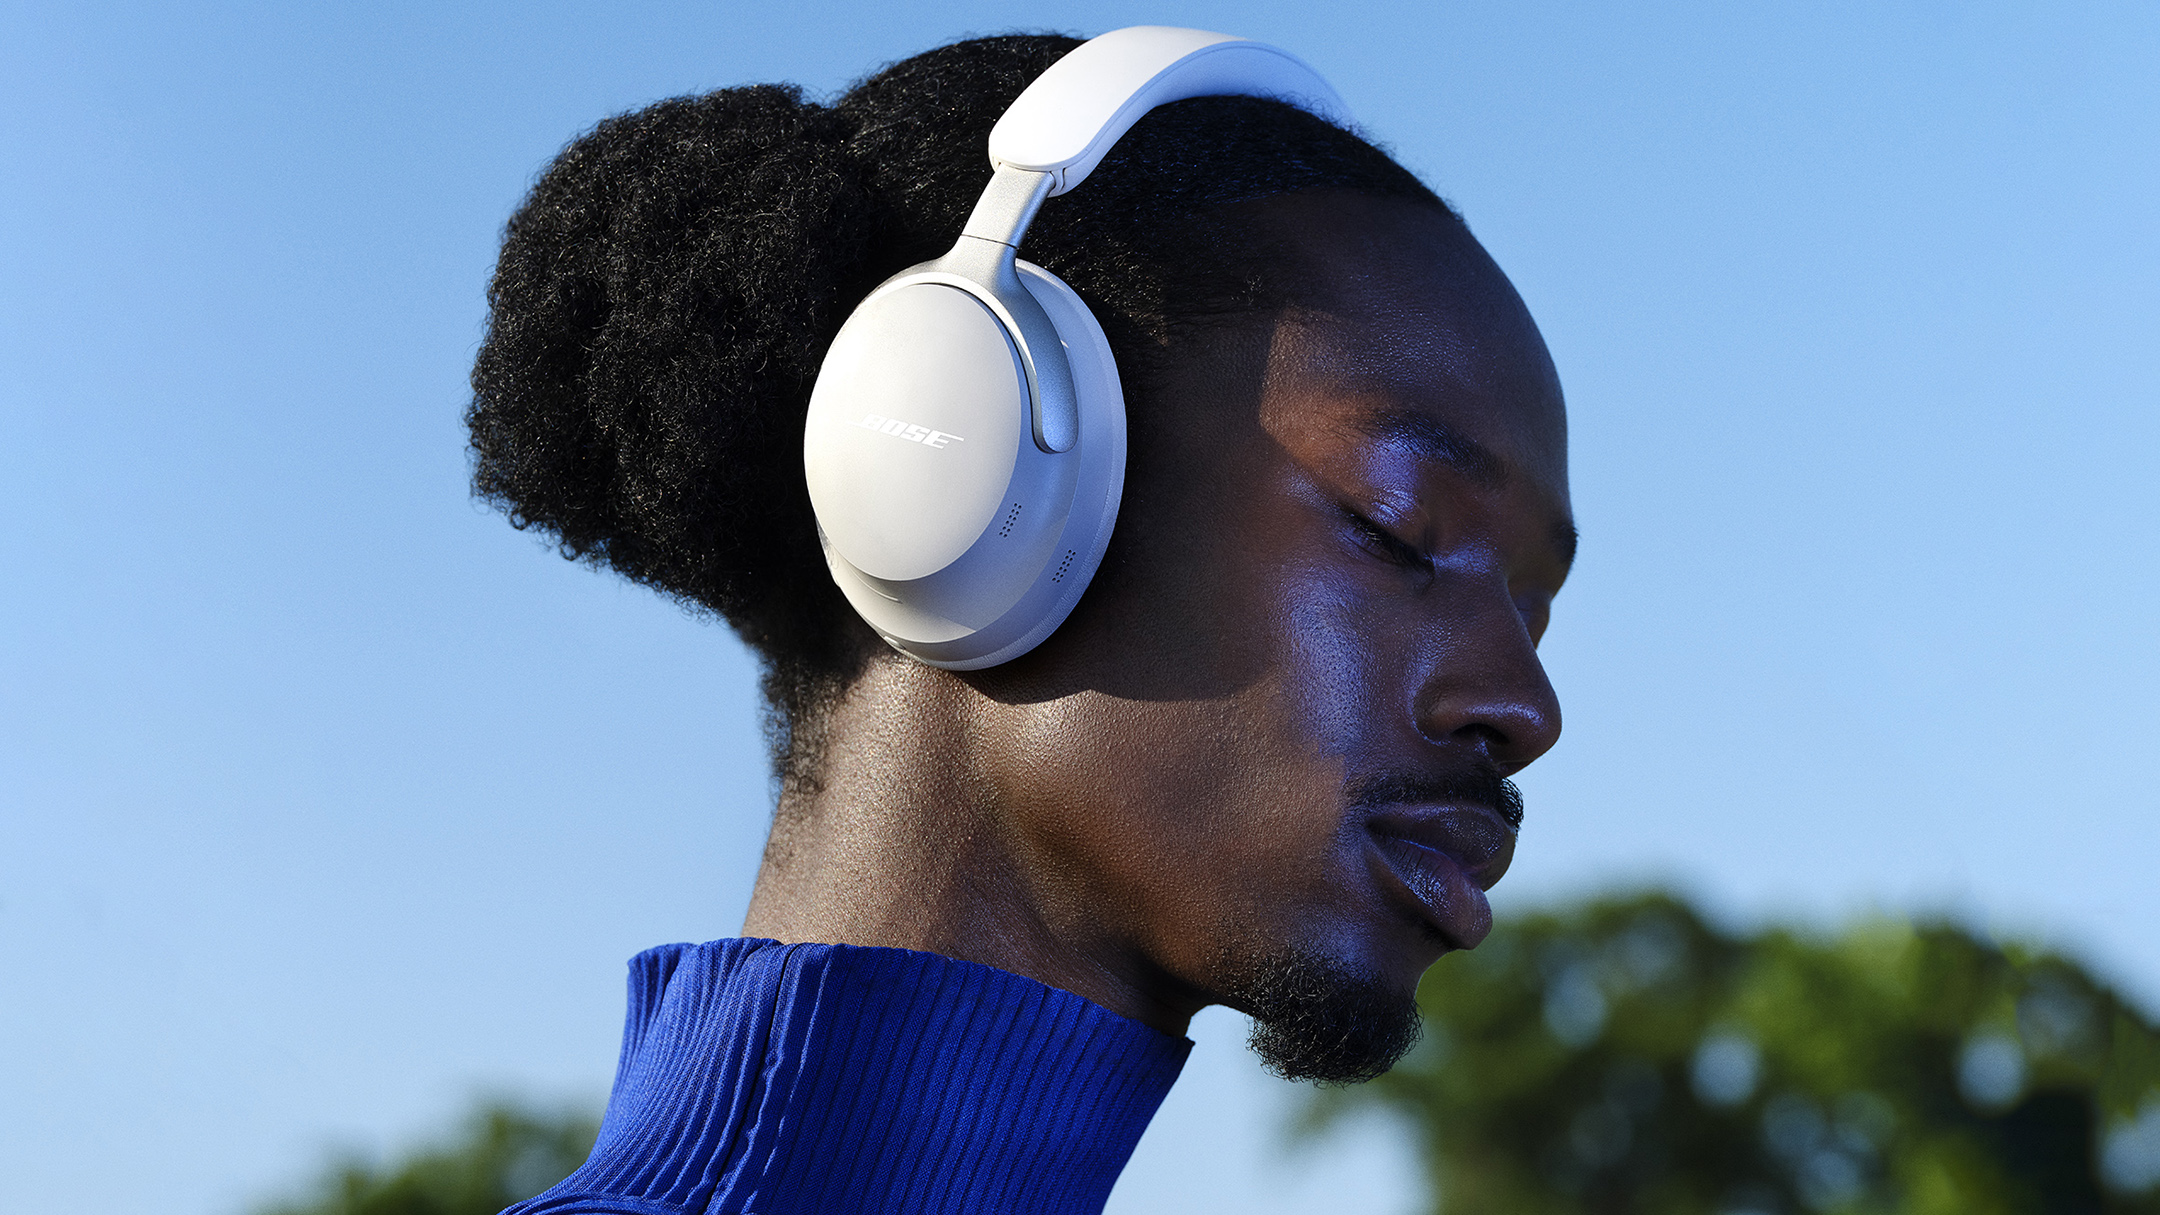 Bose QuietComfort Ultra are the AirPods Max rivals you've been dreaming of